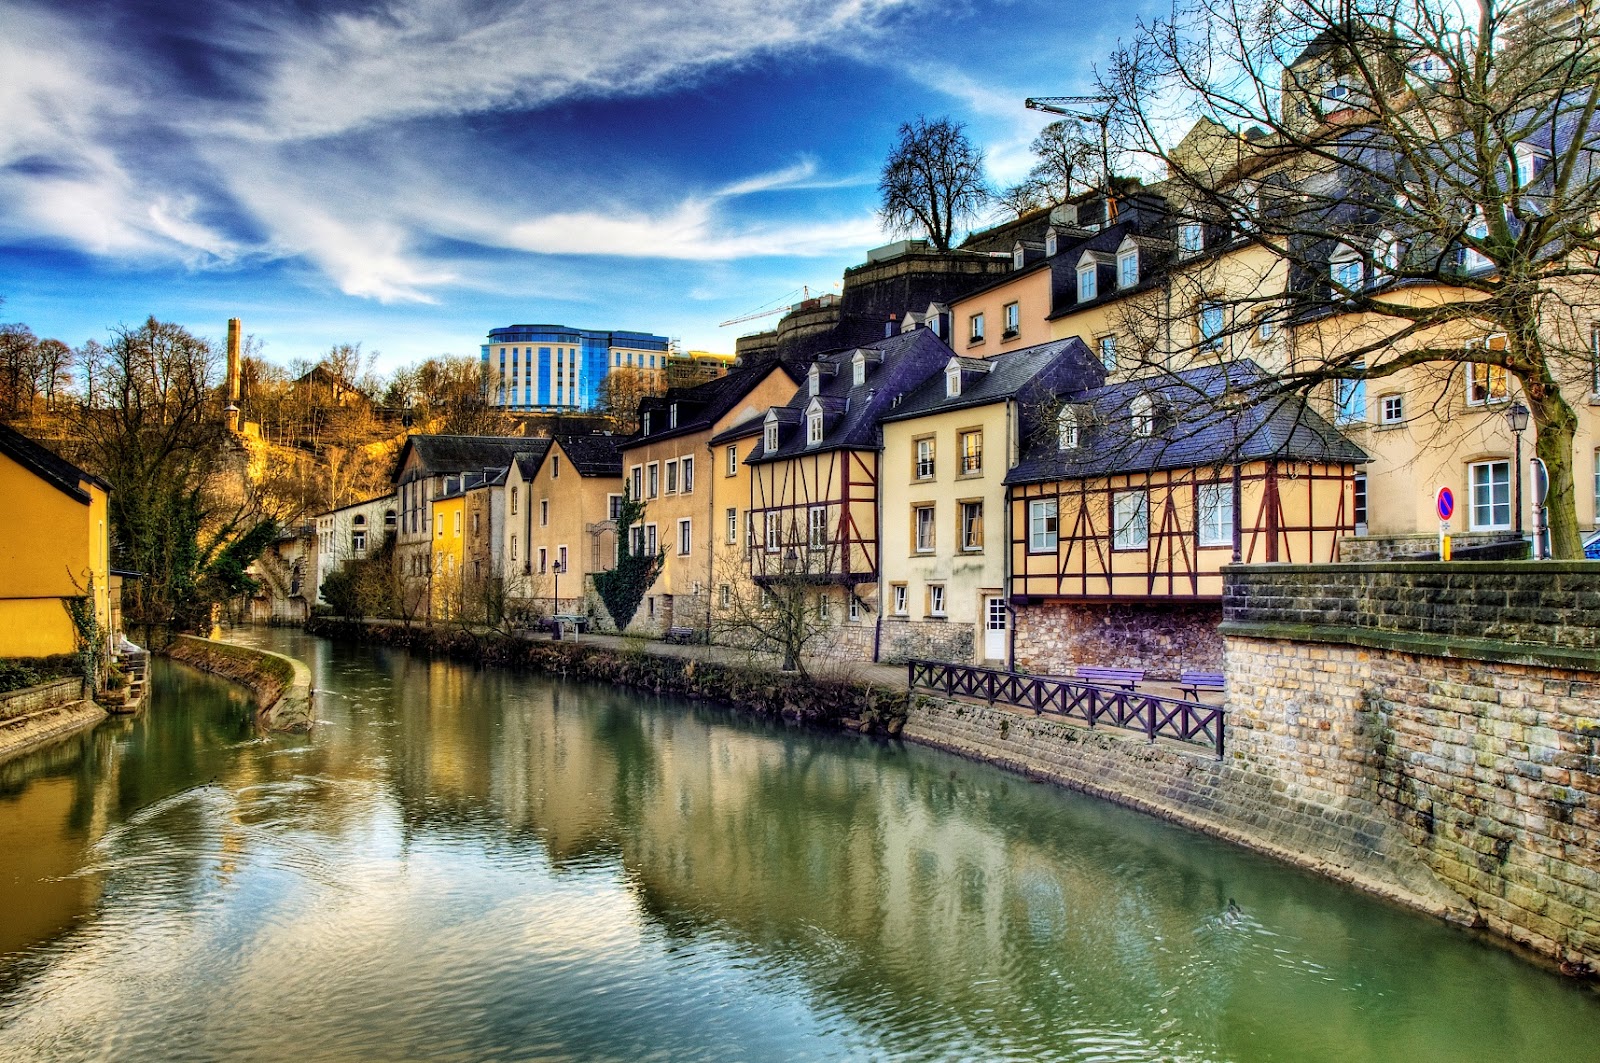 Luxembourg ( Groussherzogtum Lëtzebuerg ). A voyage to Luxembourg